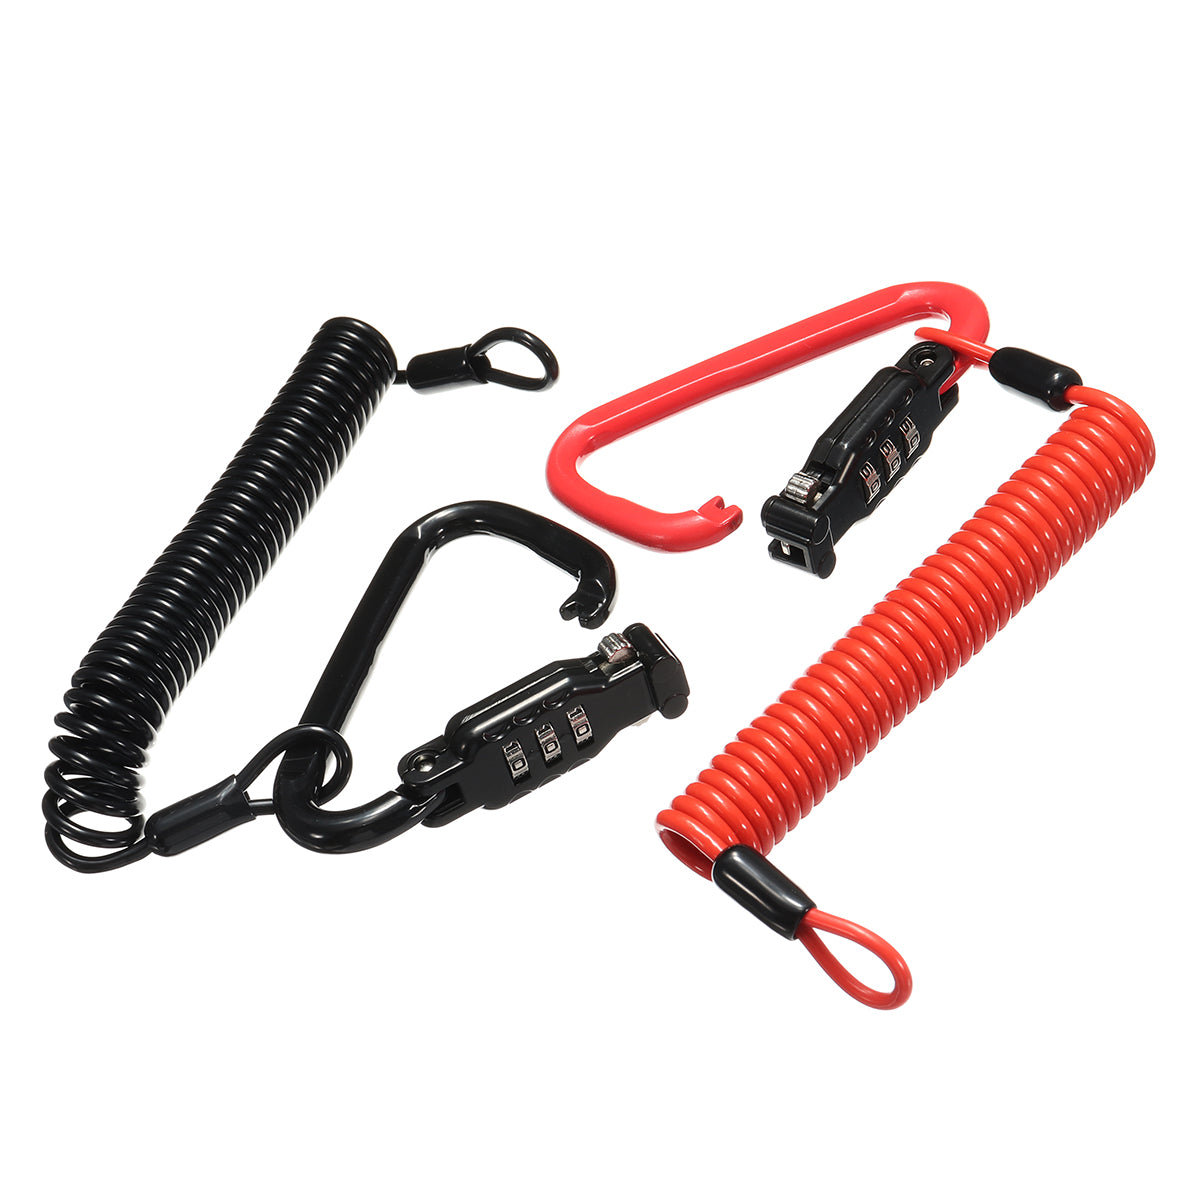 Orange Red Motorcycle Scooter Security Helmet Lock Combination Coded PIN with T-Bar Rubber Cable